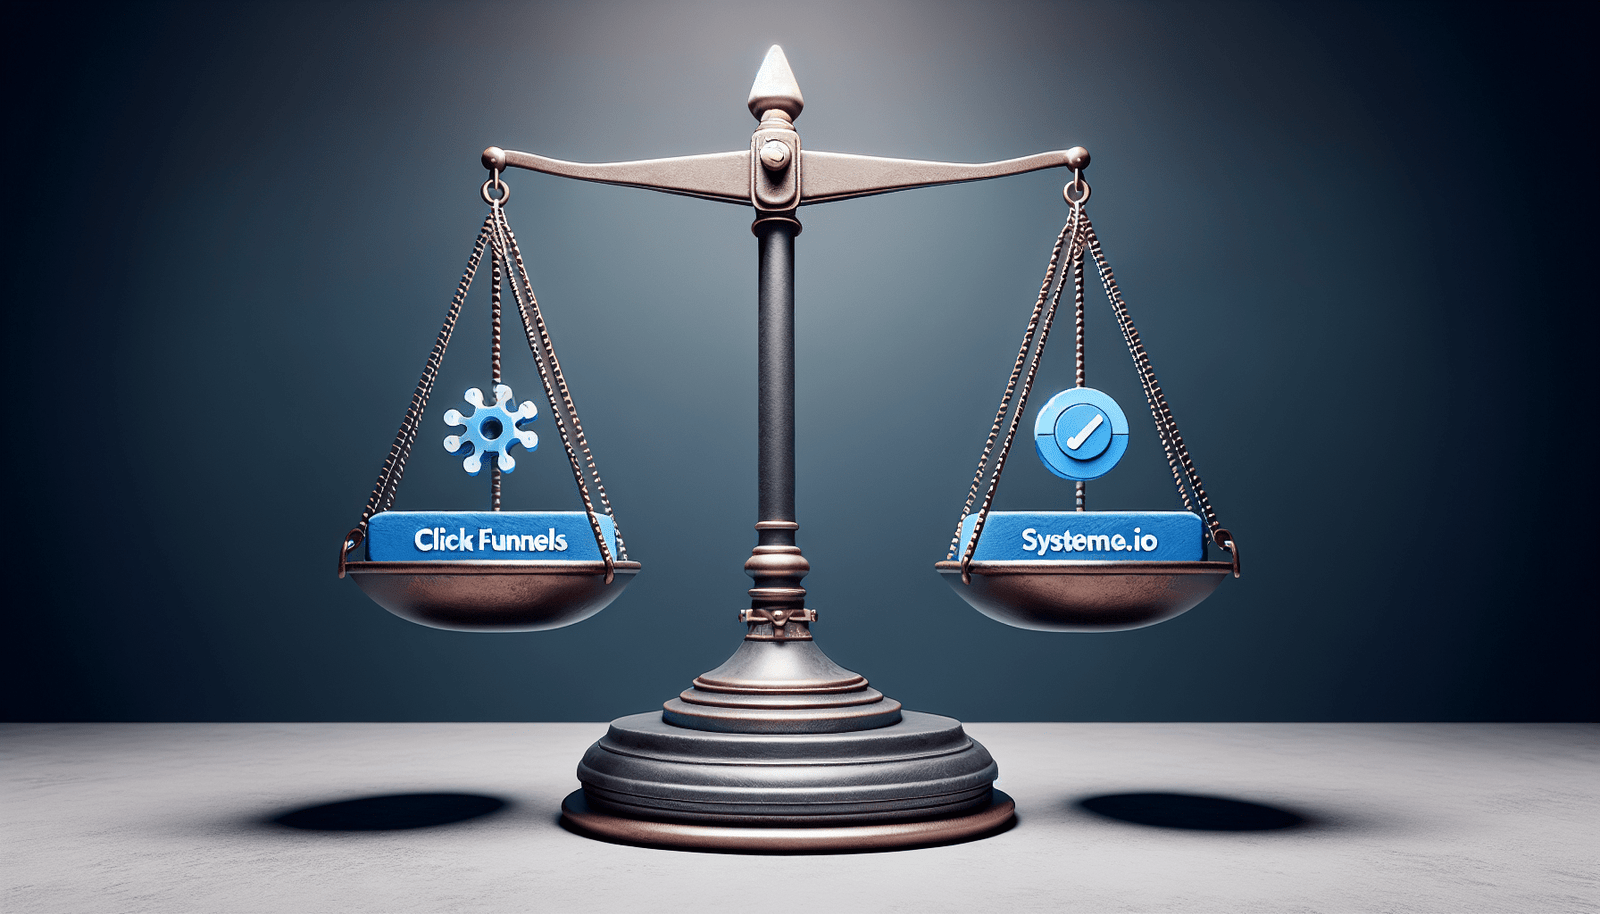 Which is better: Click Funnels or systeme.io?